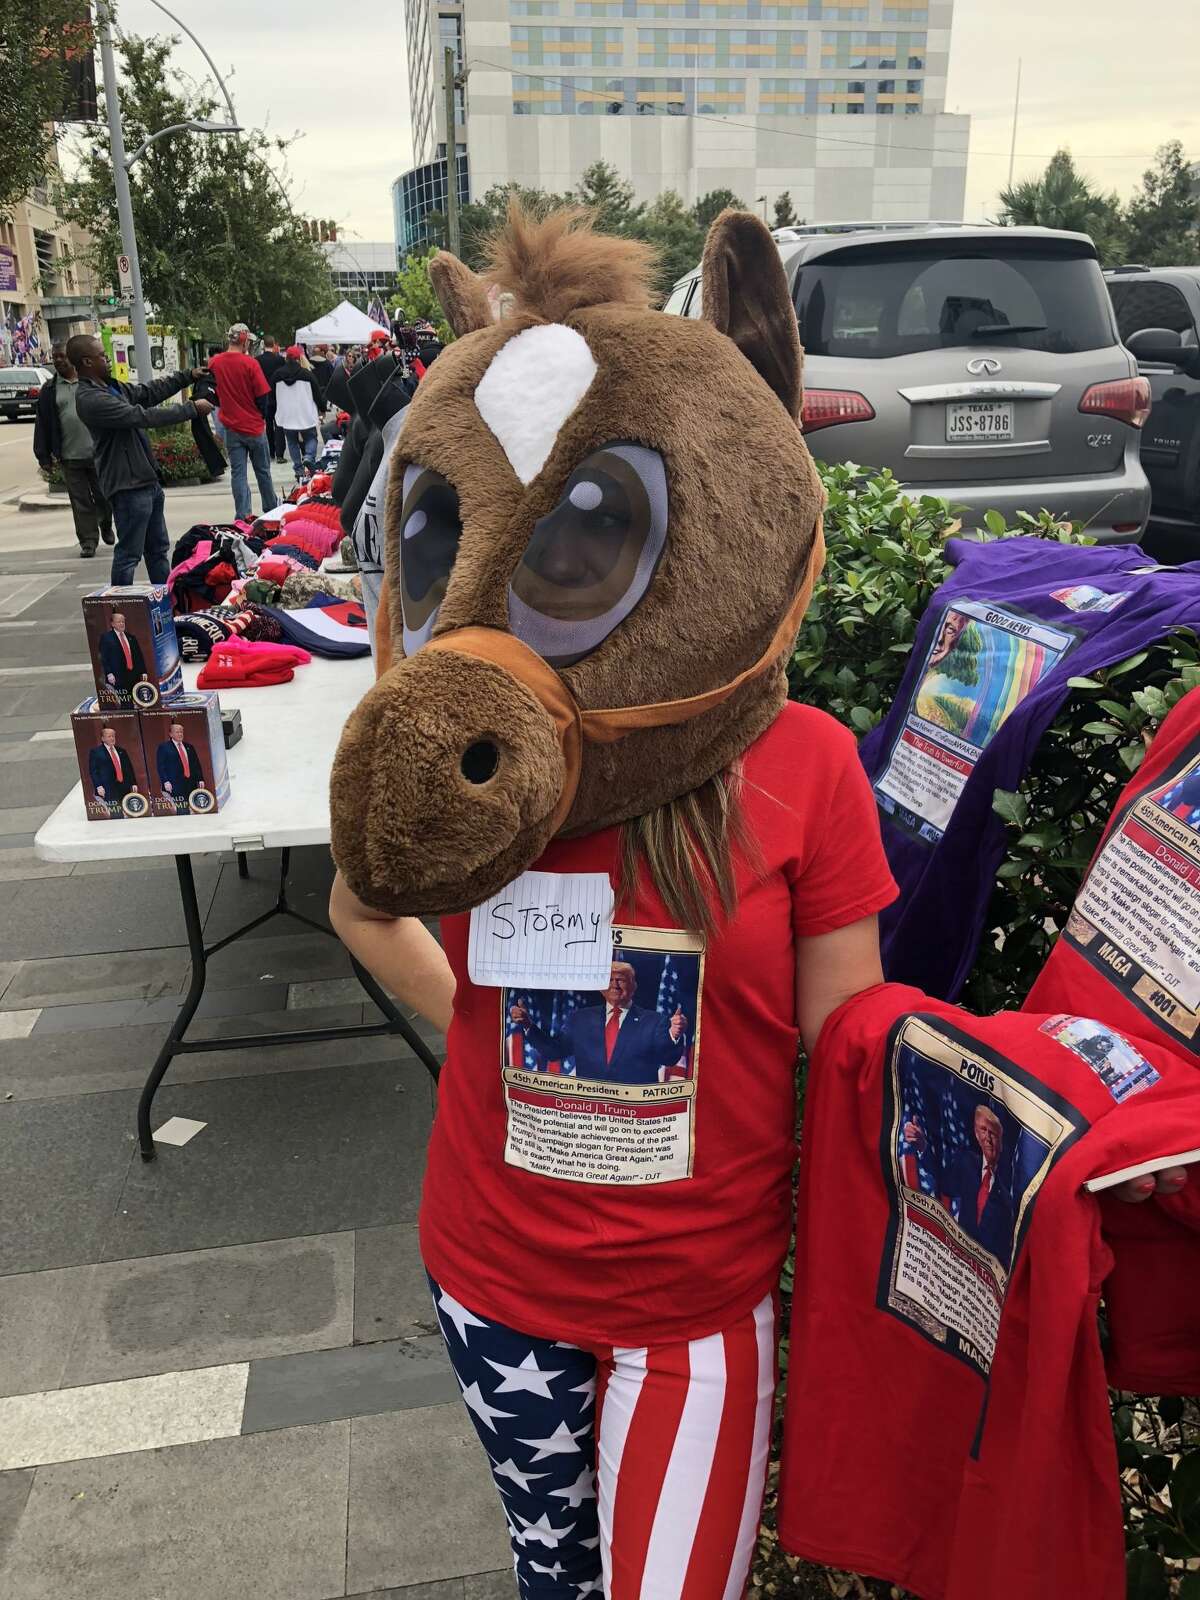 PHOTOS: Trump supporters' clothes aimed at Democrats  Thousands of Trump supporters lined up outside the Toyota Center on Monday wearing clothes designed to poke fun at Democrats.  >>> See more anti-liberal clothing during the rally in downtown Houston 